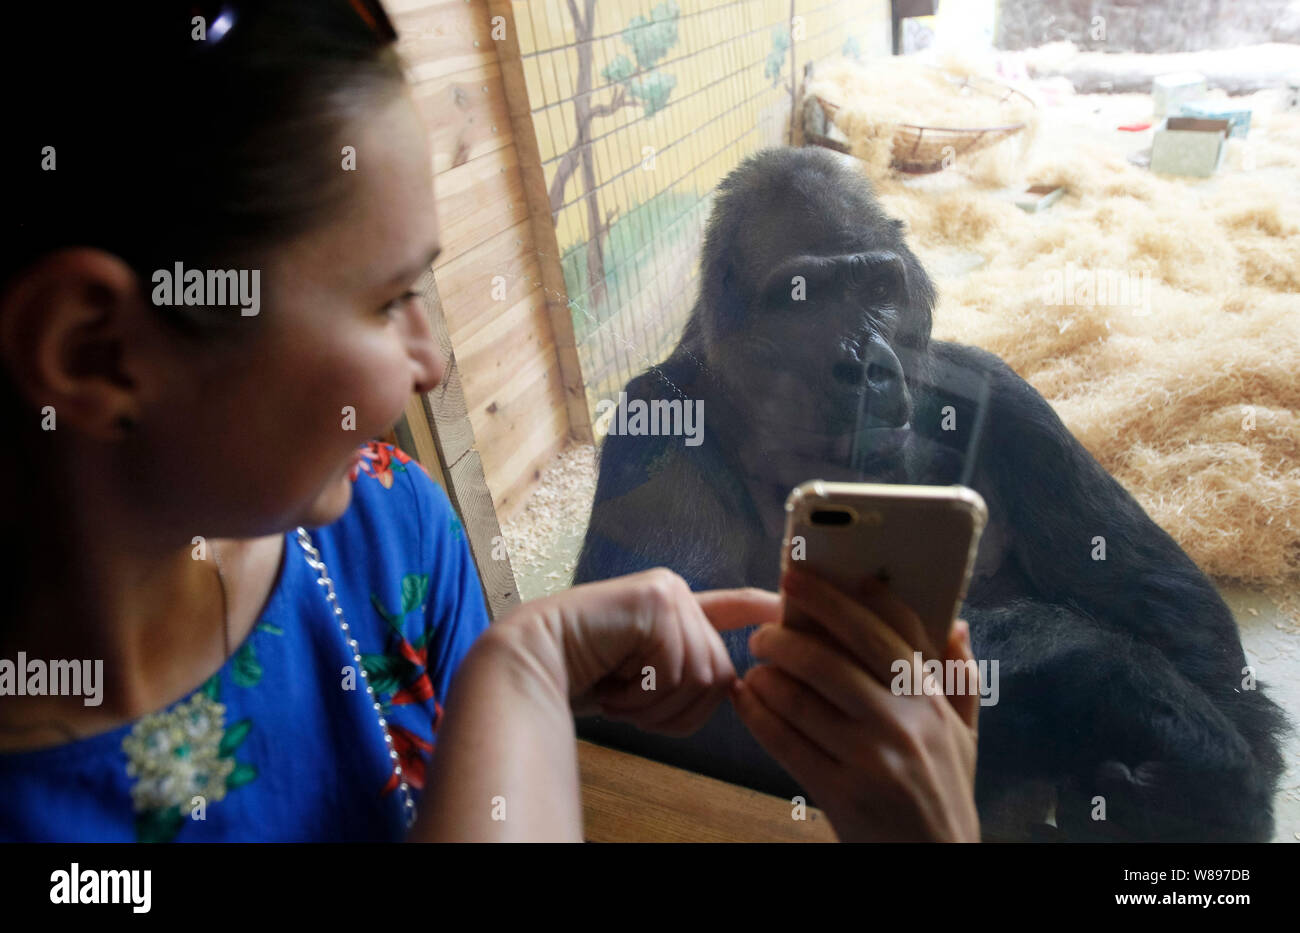 A journalist shows selfie on her mobile to Tony the gorilla, as he celebrates his 45th birthday in Kiev zoo.The gorilla Tony was born at the Zoo in Nuremberg (Germany) on 1974. Subsequently he was in the zoos of Hanover and Saarbrücken, and since September 29, 1999, Tony moved to Kiev Zoo. Tony is only one the gorilla in Ukraine. Stock Photo